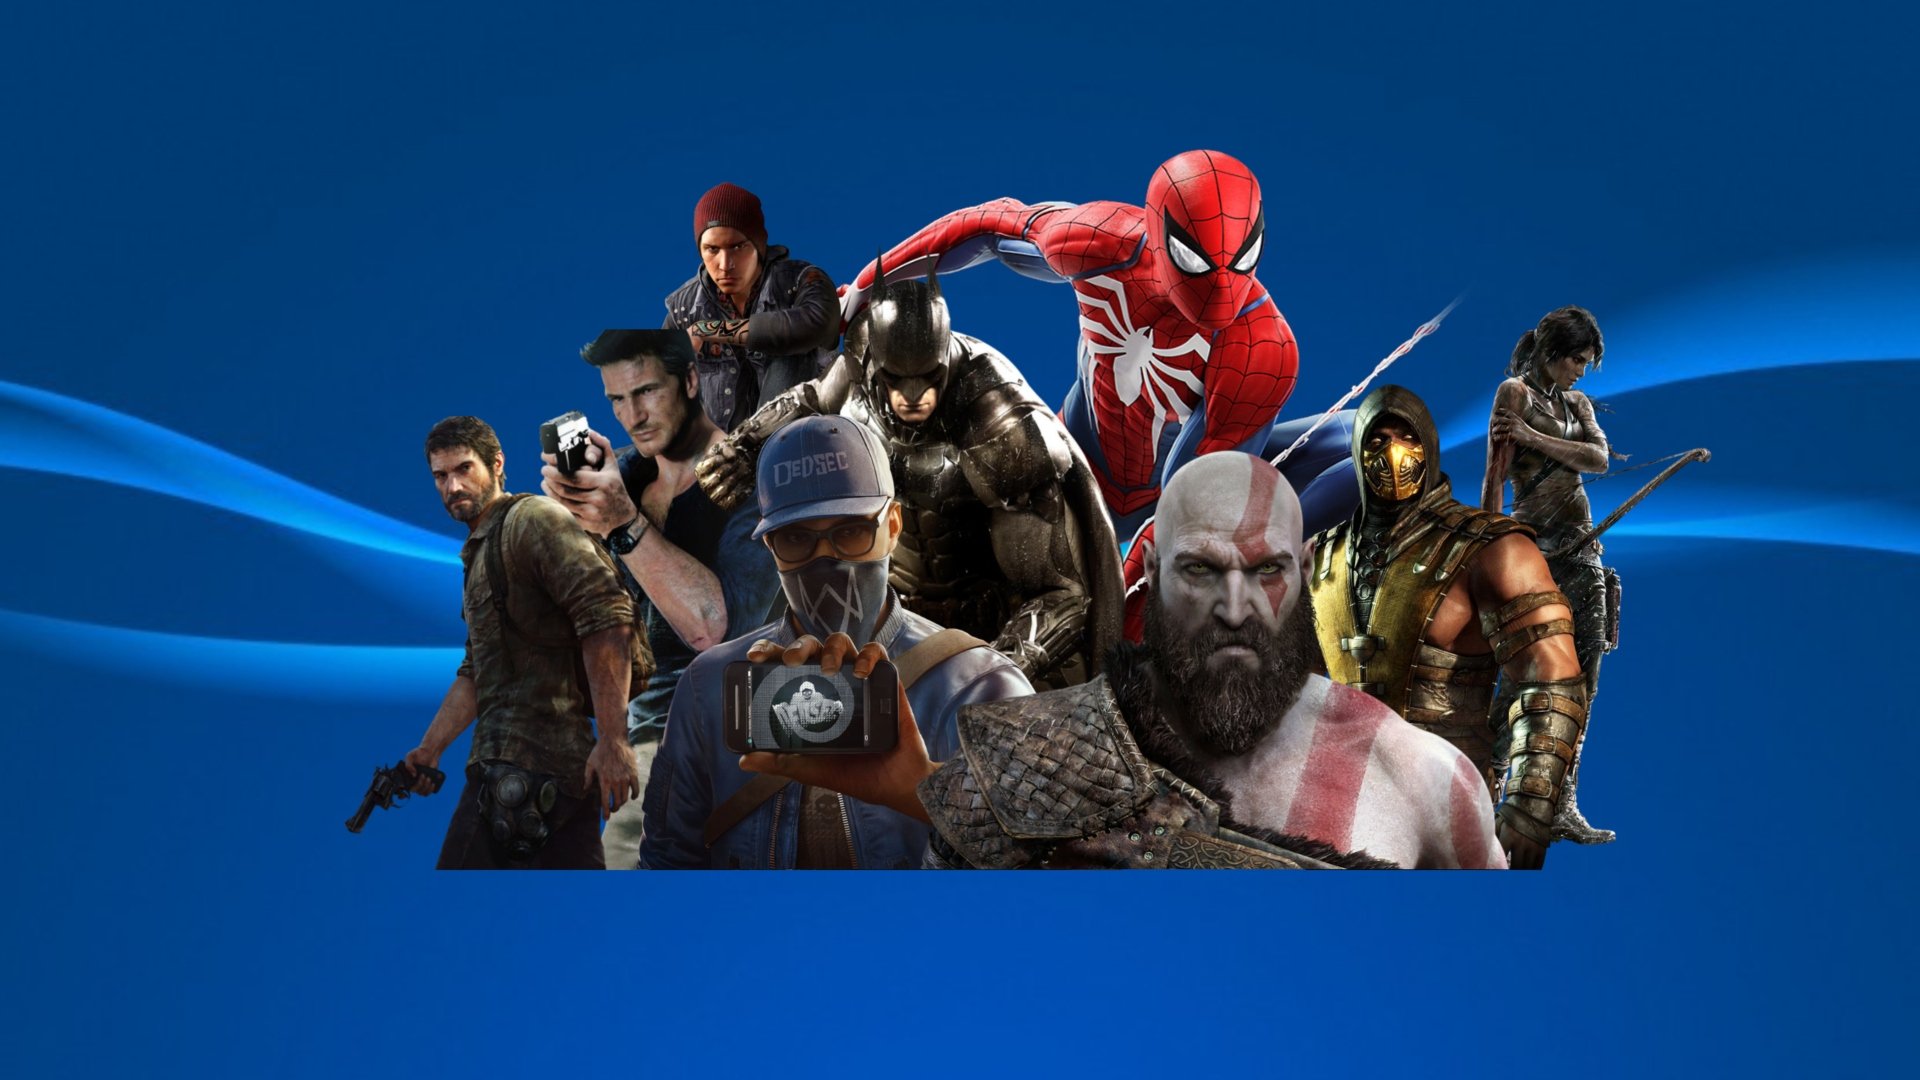 Heroes ps5. Игры на ps4. PLAYSTATION персонажи игр. Персонажи игр PLAYSTATION 4. Sony ps4 игры.